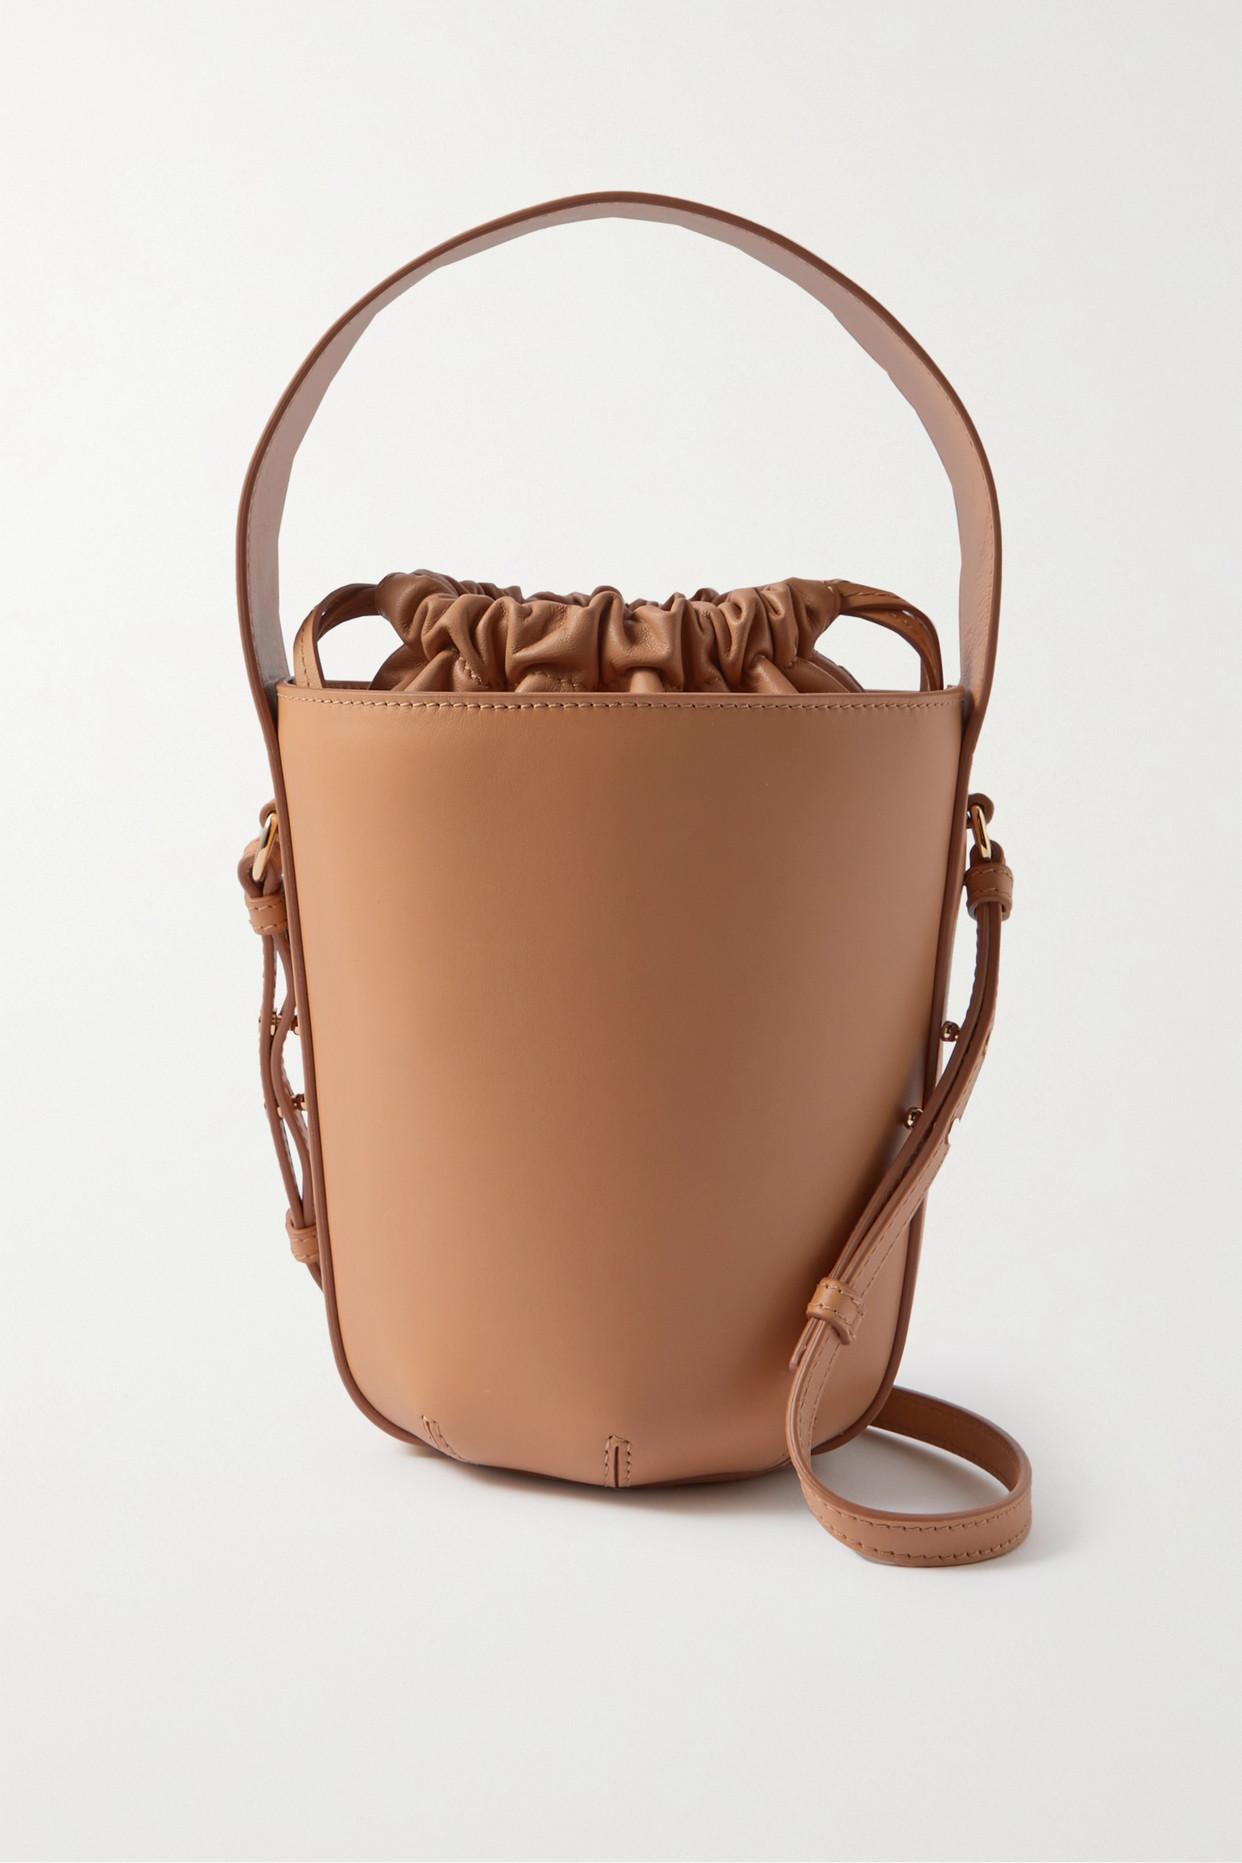 Chloé + Net Sustain Sense Embroidered Leather Bucket Bag in Brown | Lyst